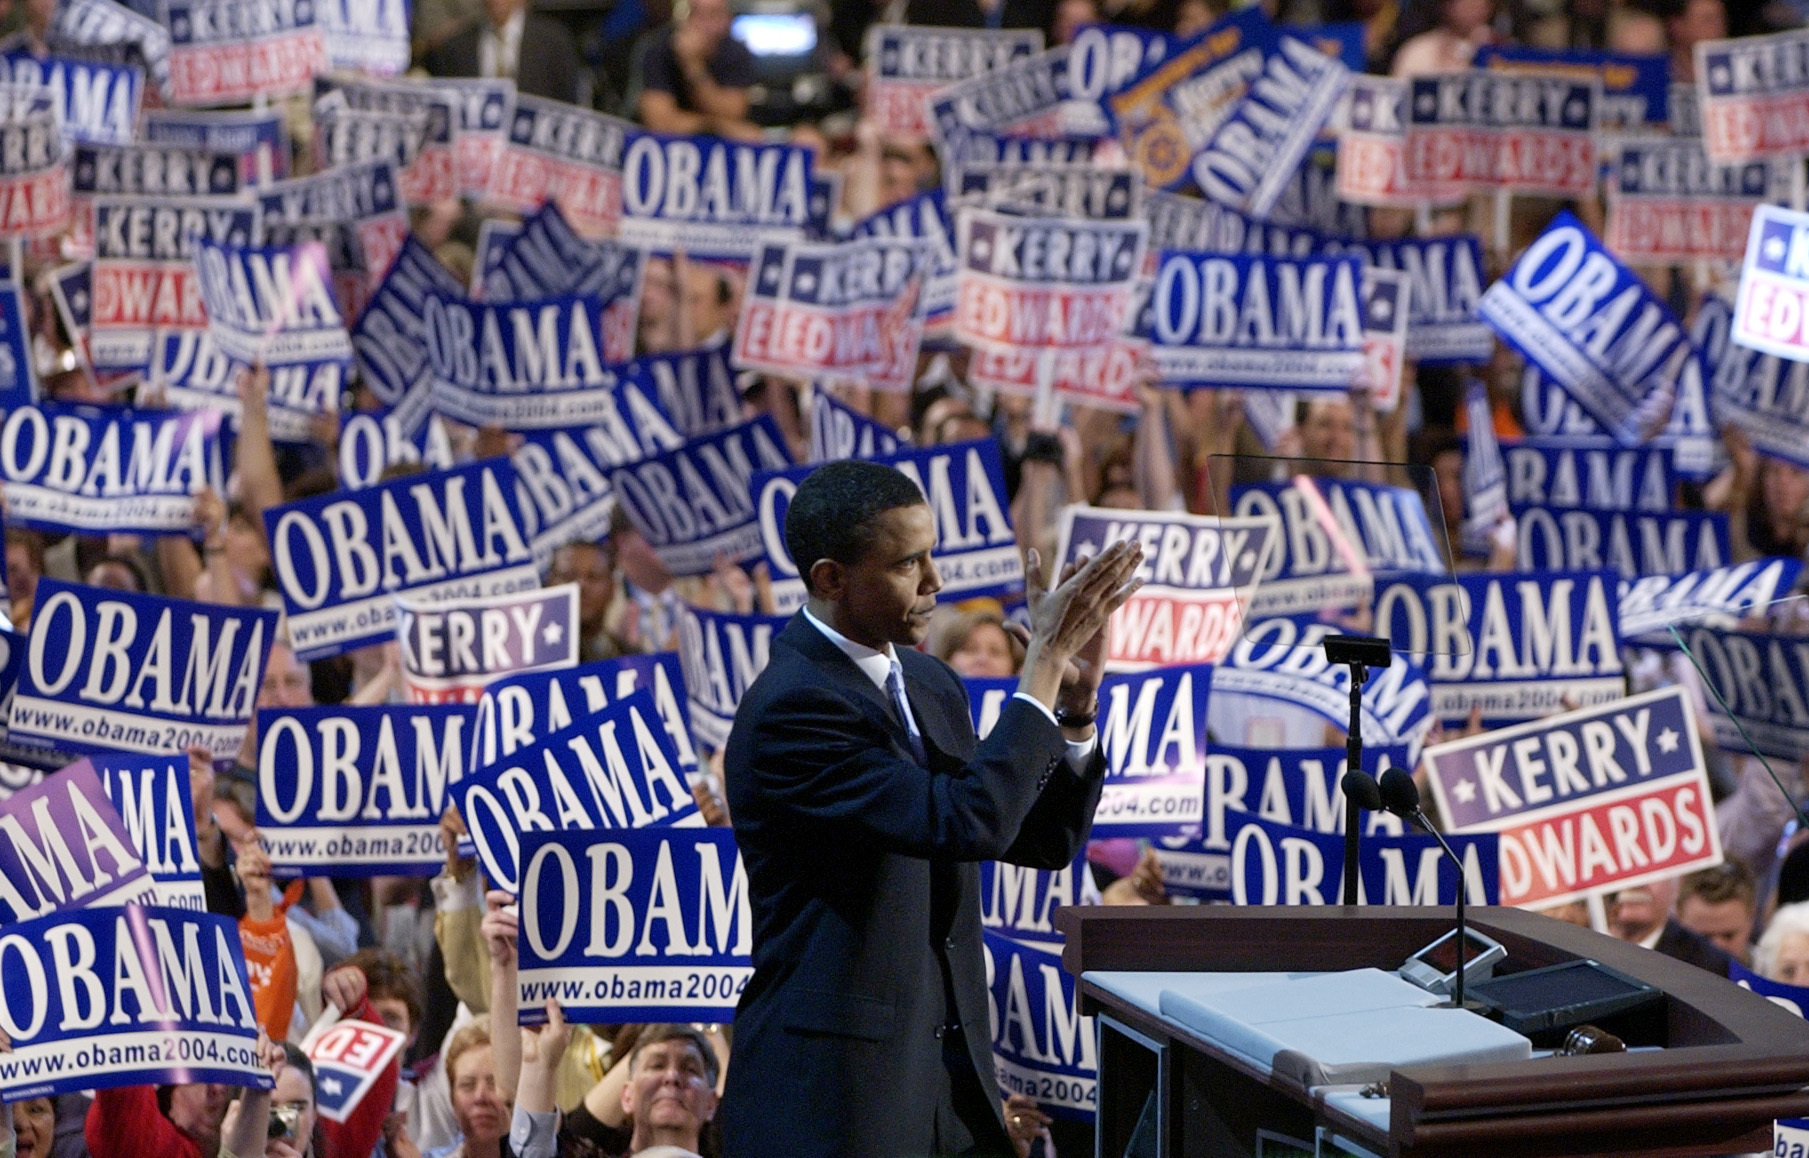 PHOTO: In this July 27, 2004, file photo, Barack Obama, then-candidate for the Senate from Illinois, speaks to delegates during the Democratic National Convention at the FleetCenter in Boston.